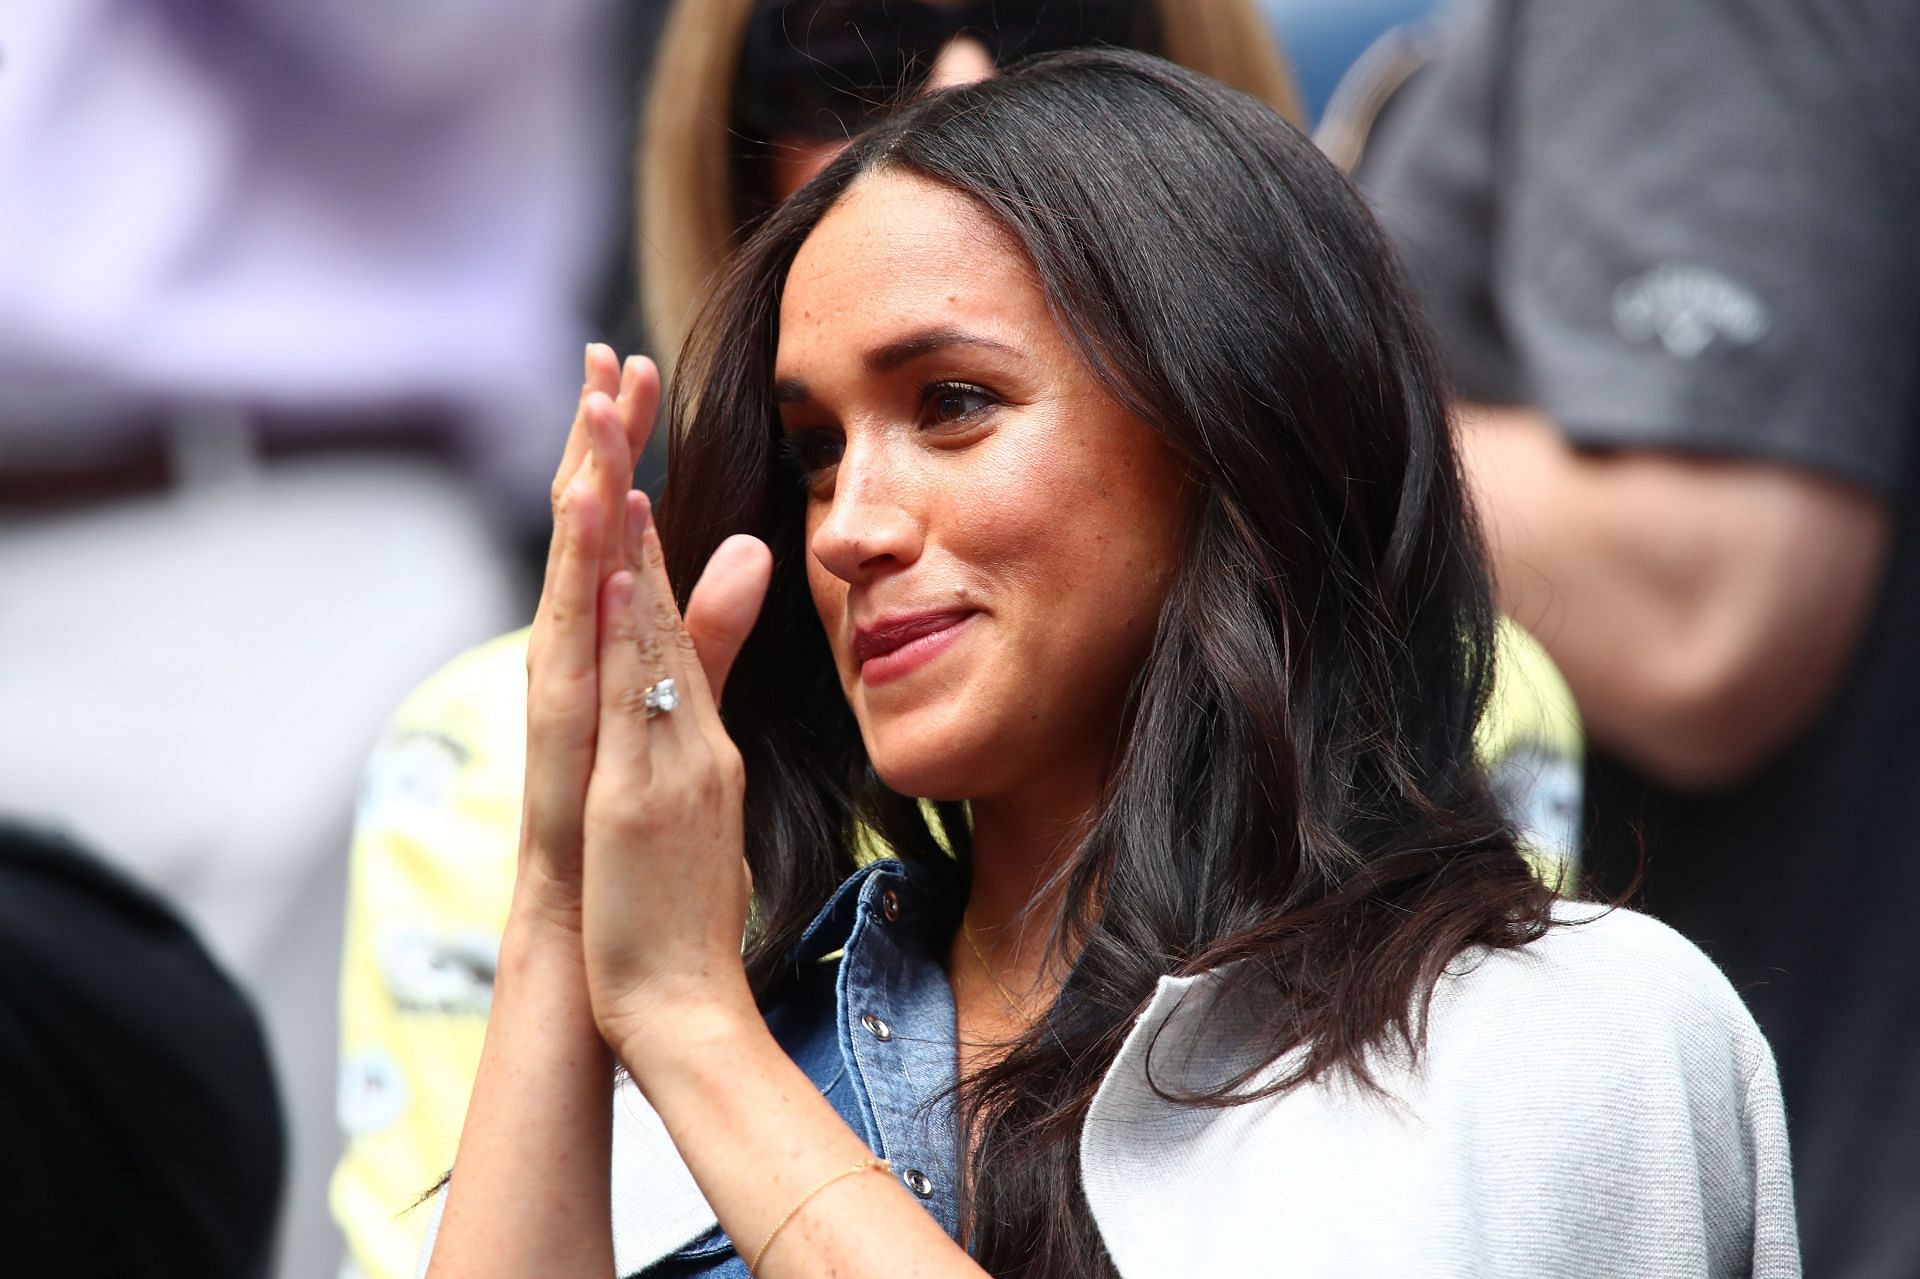 Meghan Markle cheers for Serena Williams at the 2019 US Open